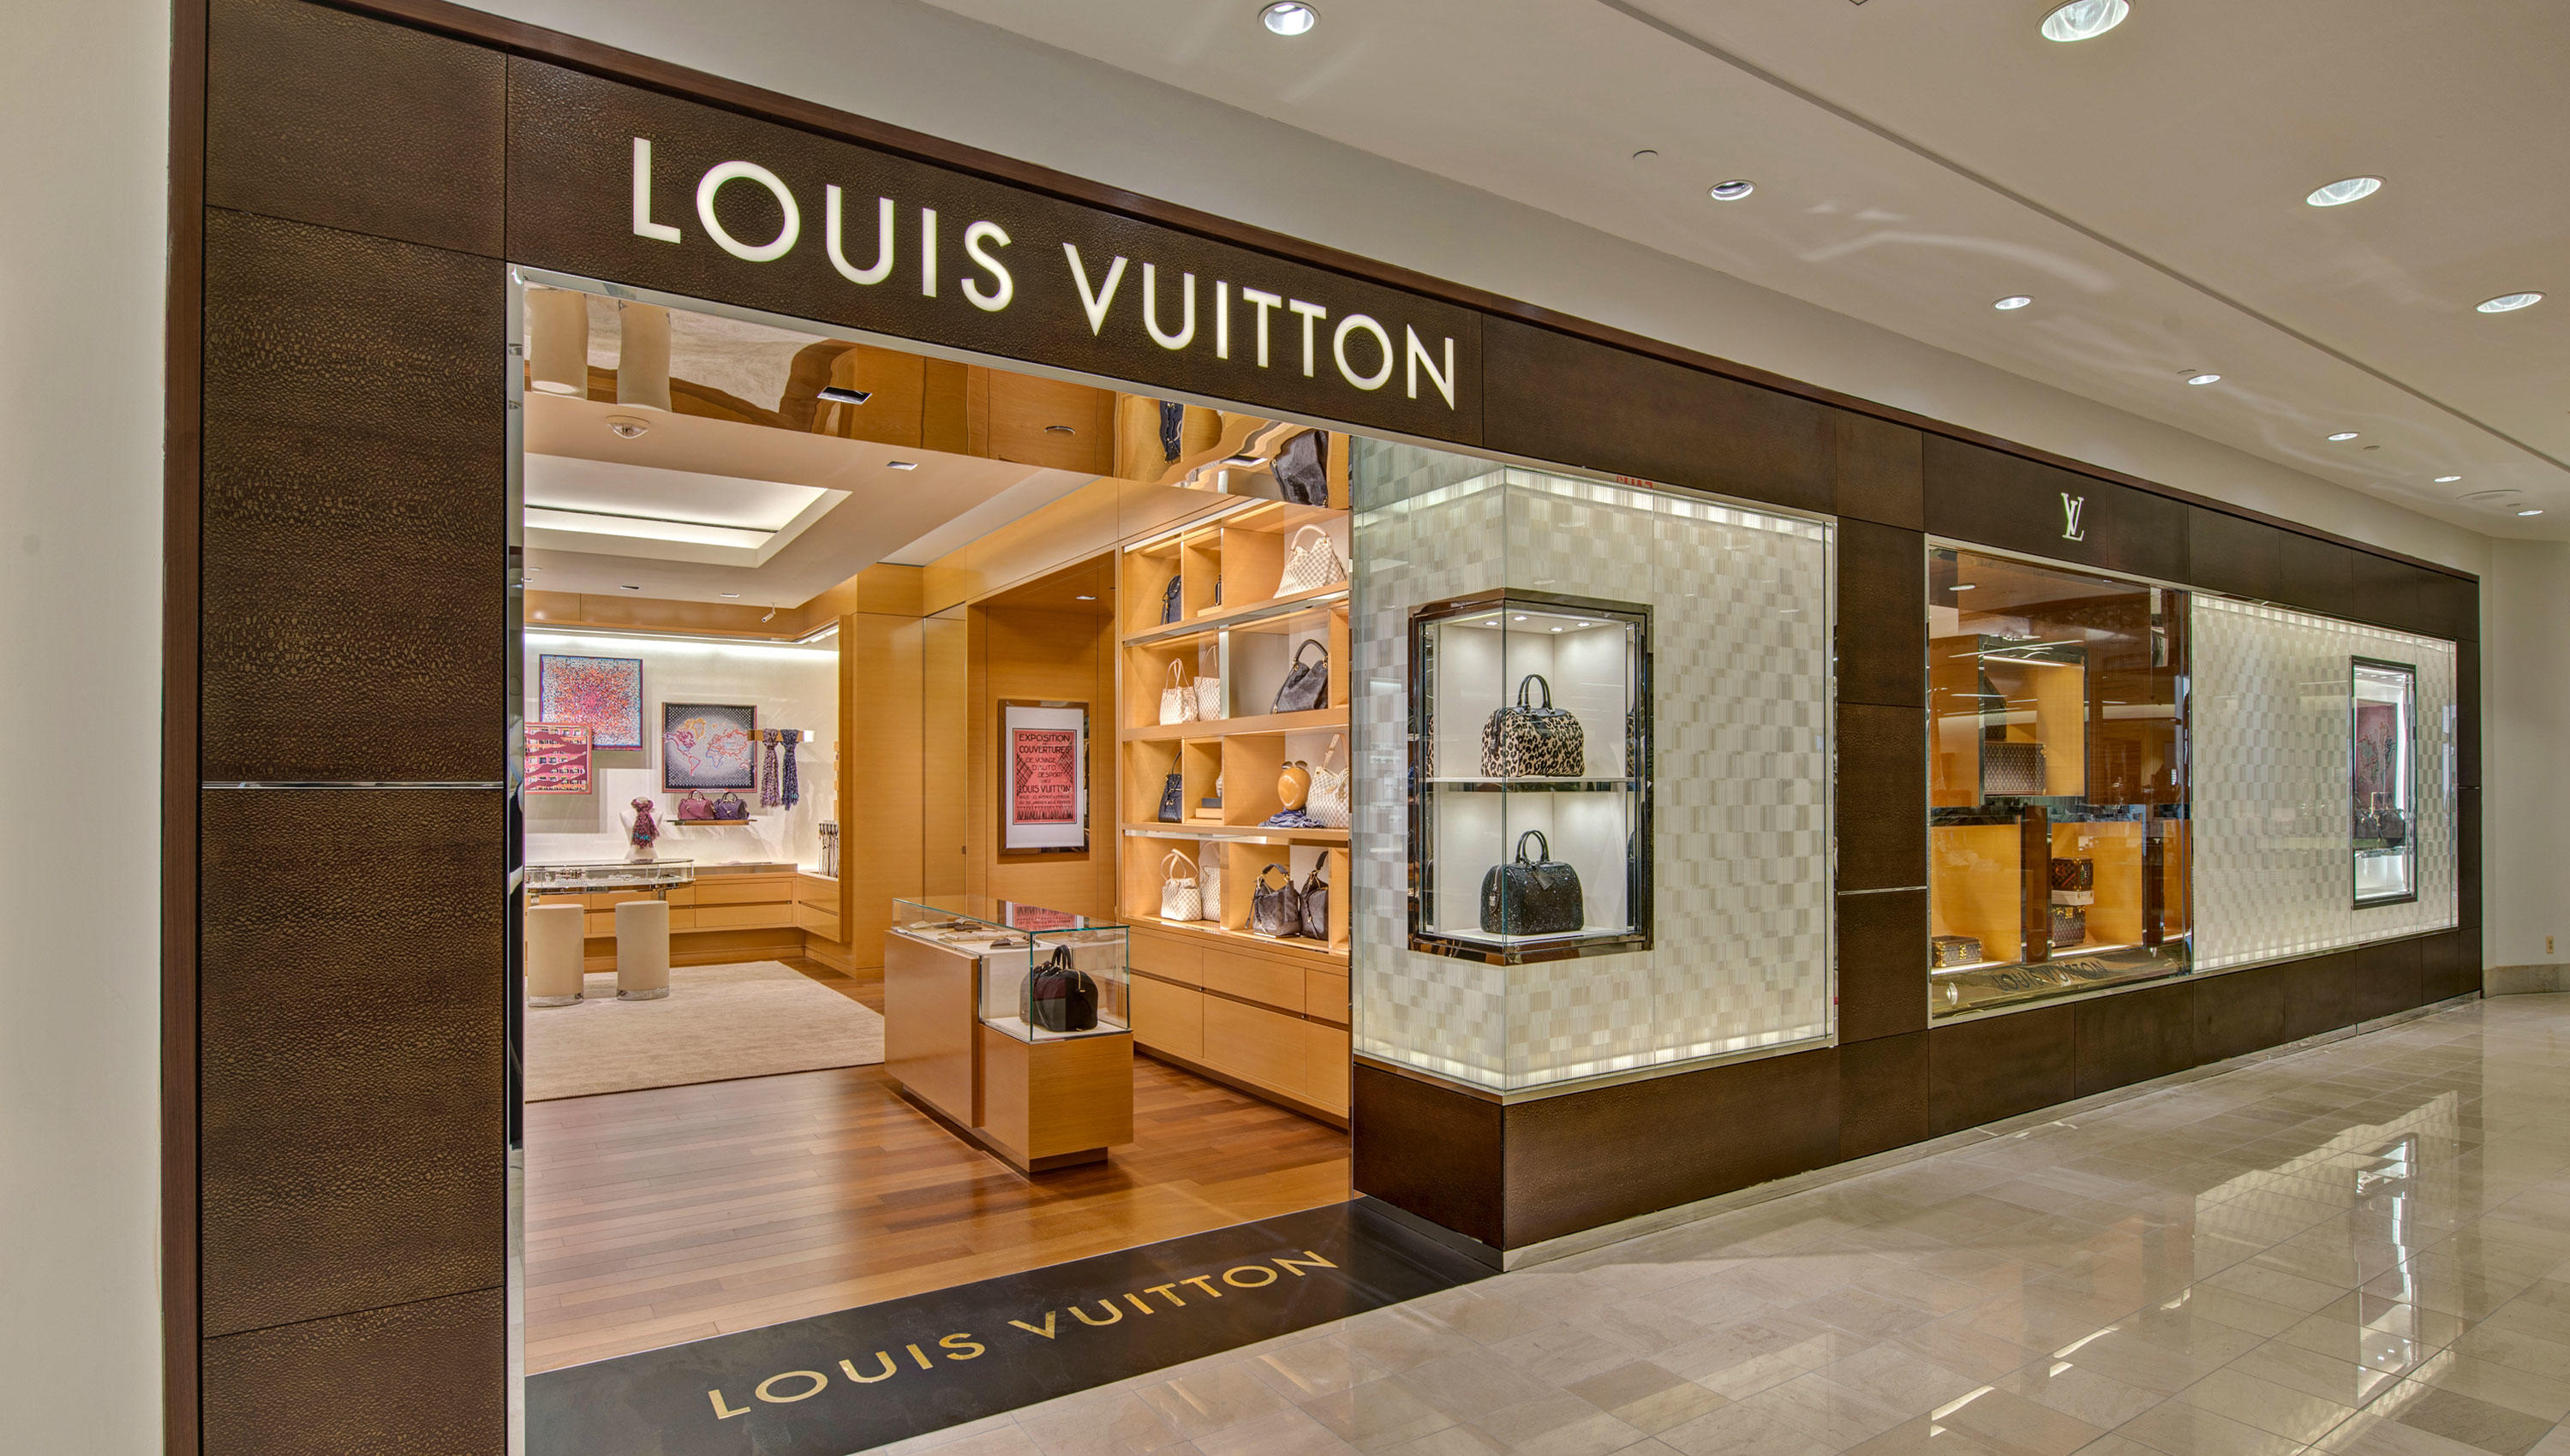 Louis Vuitton Coupon Code Online | Confederated Tribes of the Umatilla Indian Reservation